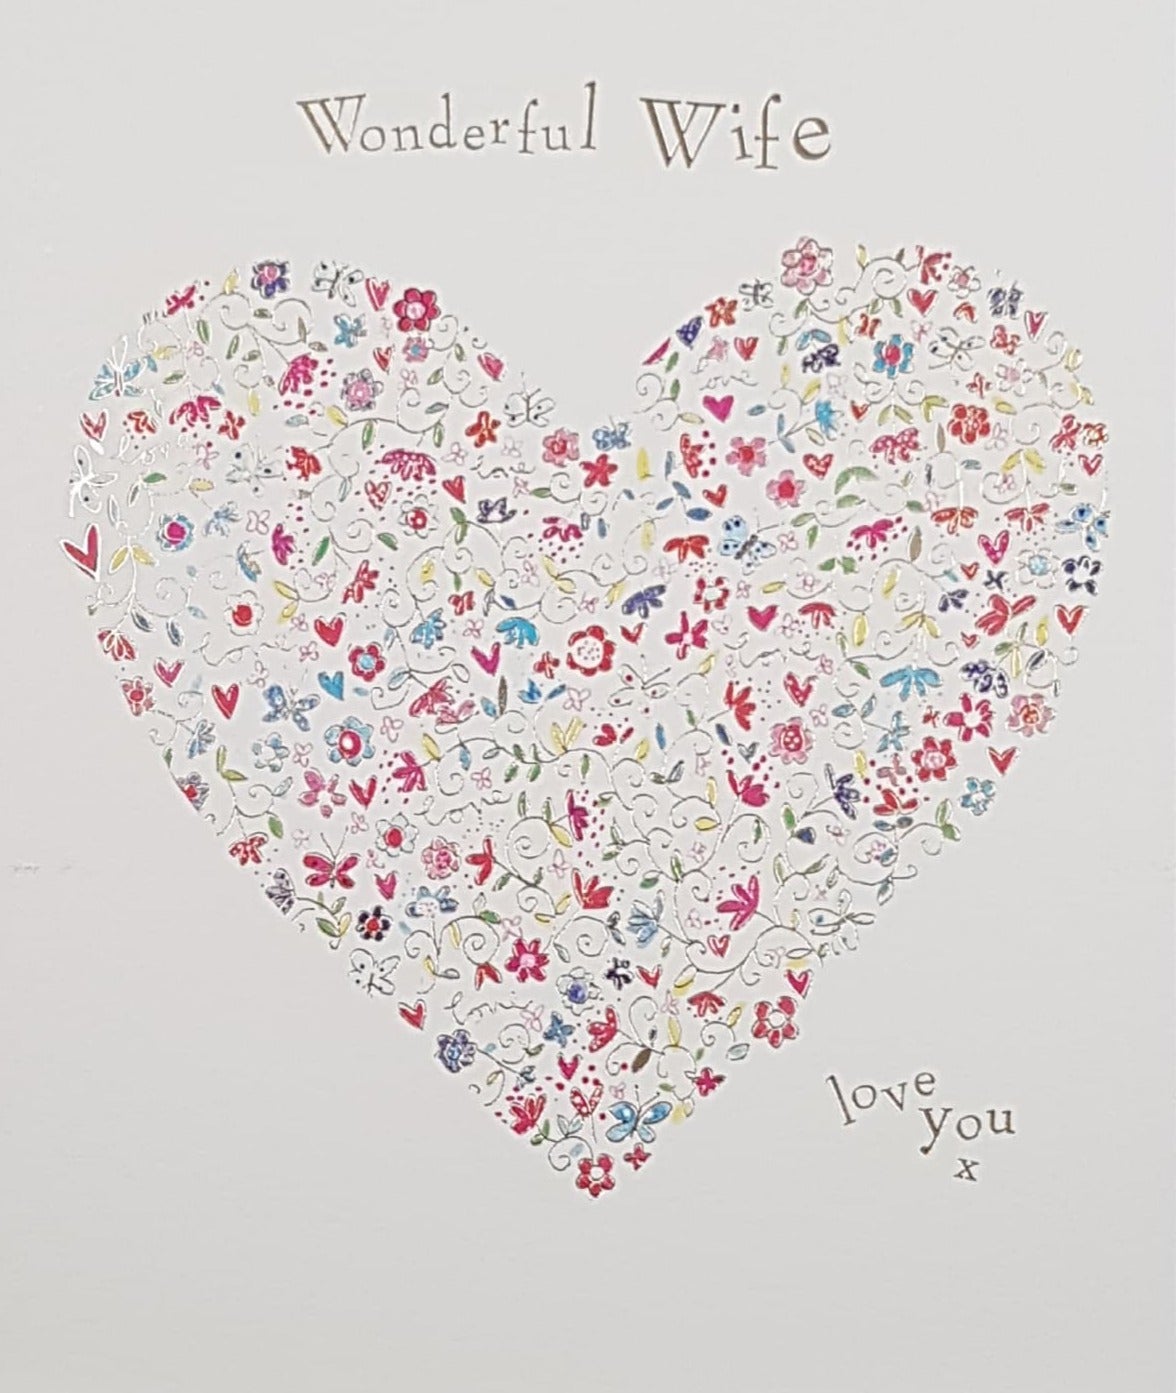 Birthday Card - Wife / A Heart Made Of Little Flowers